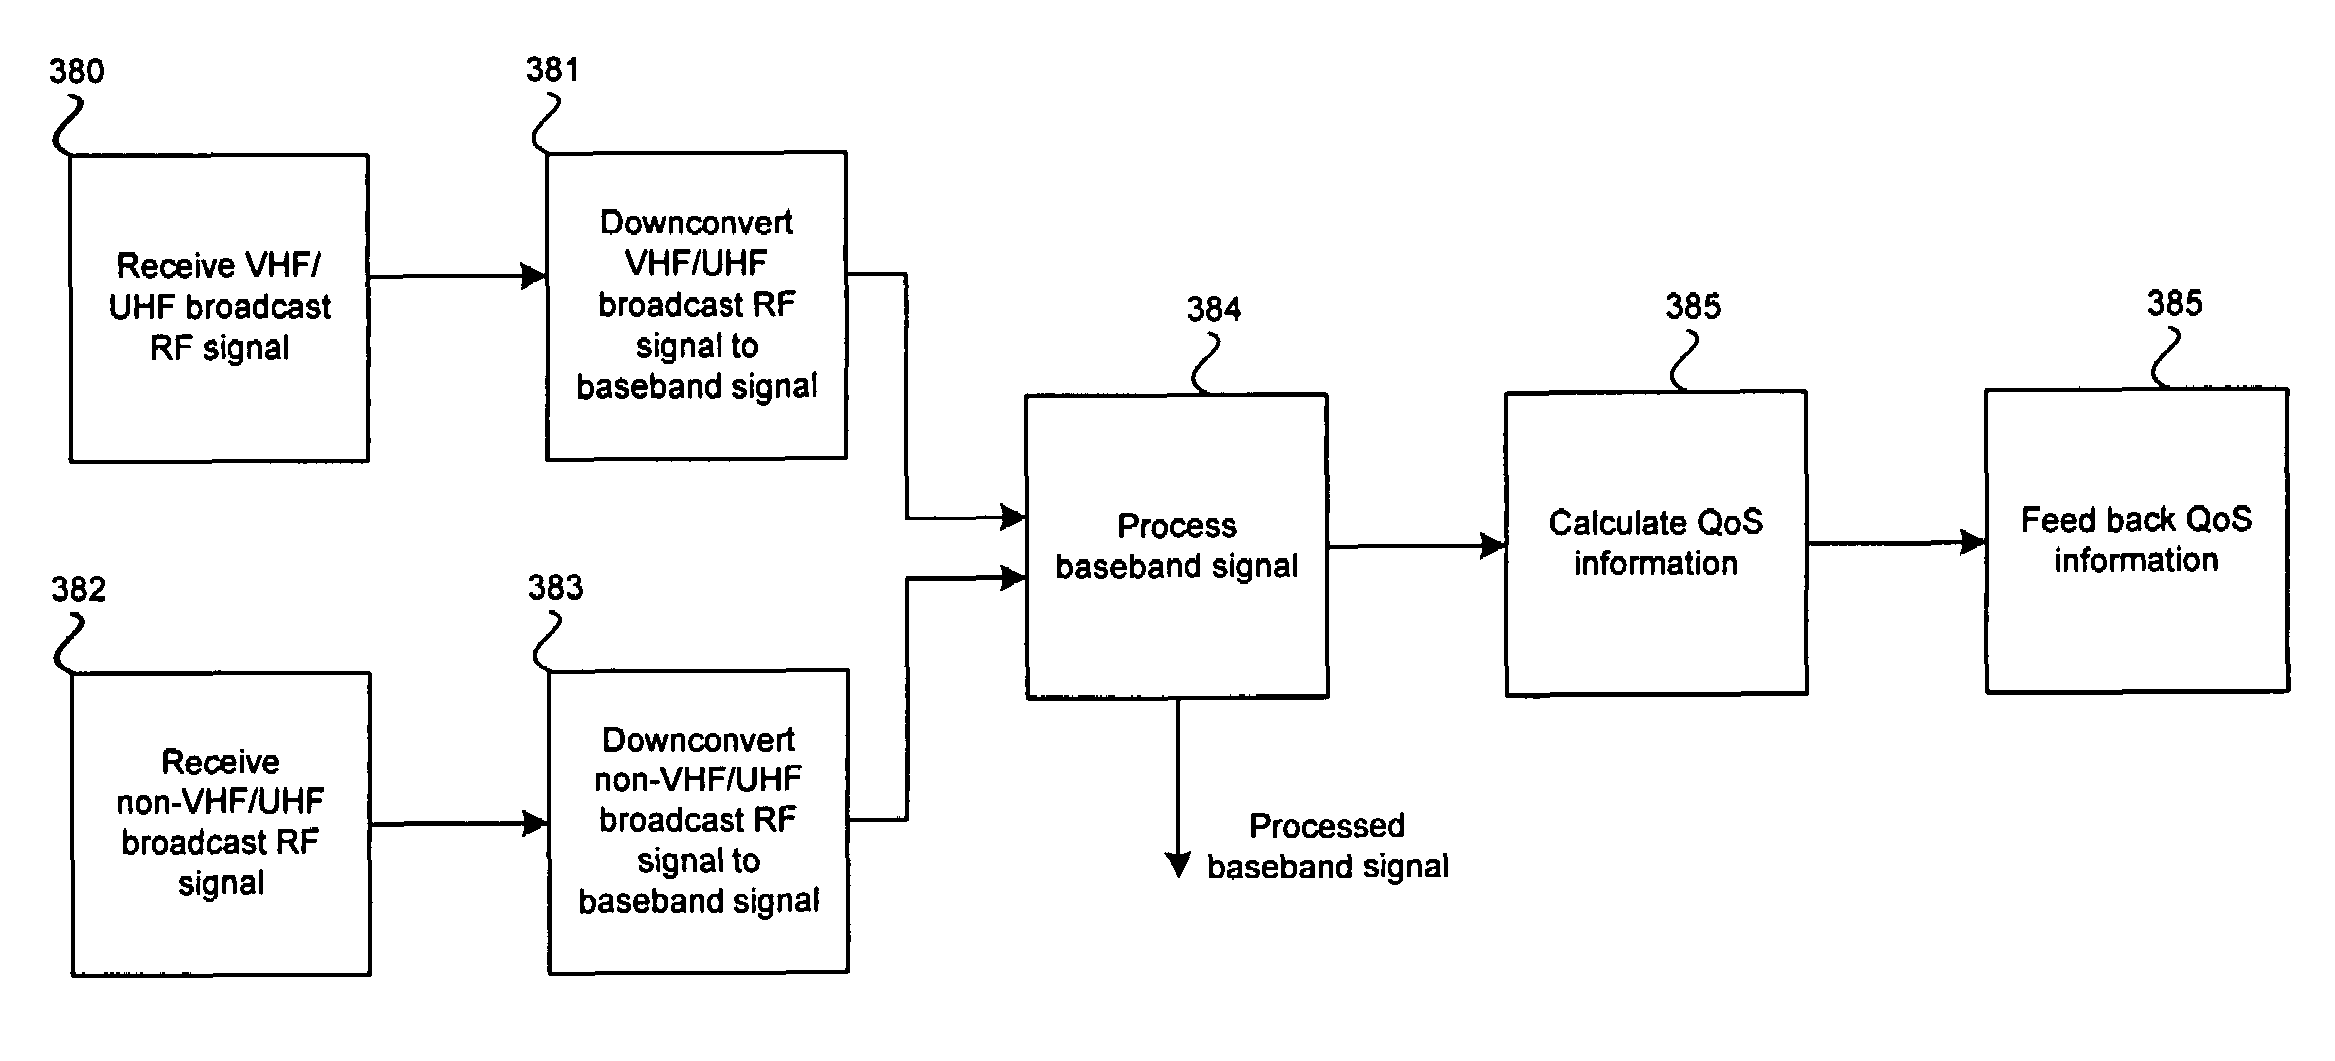 Method and system for cellular network services and an intelligent integrated broadcast television downlink having intelligent service control with feedback